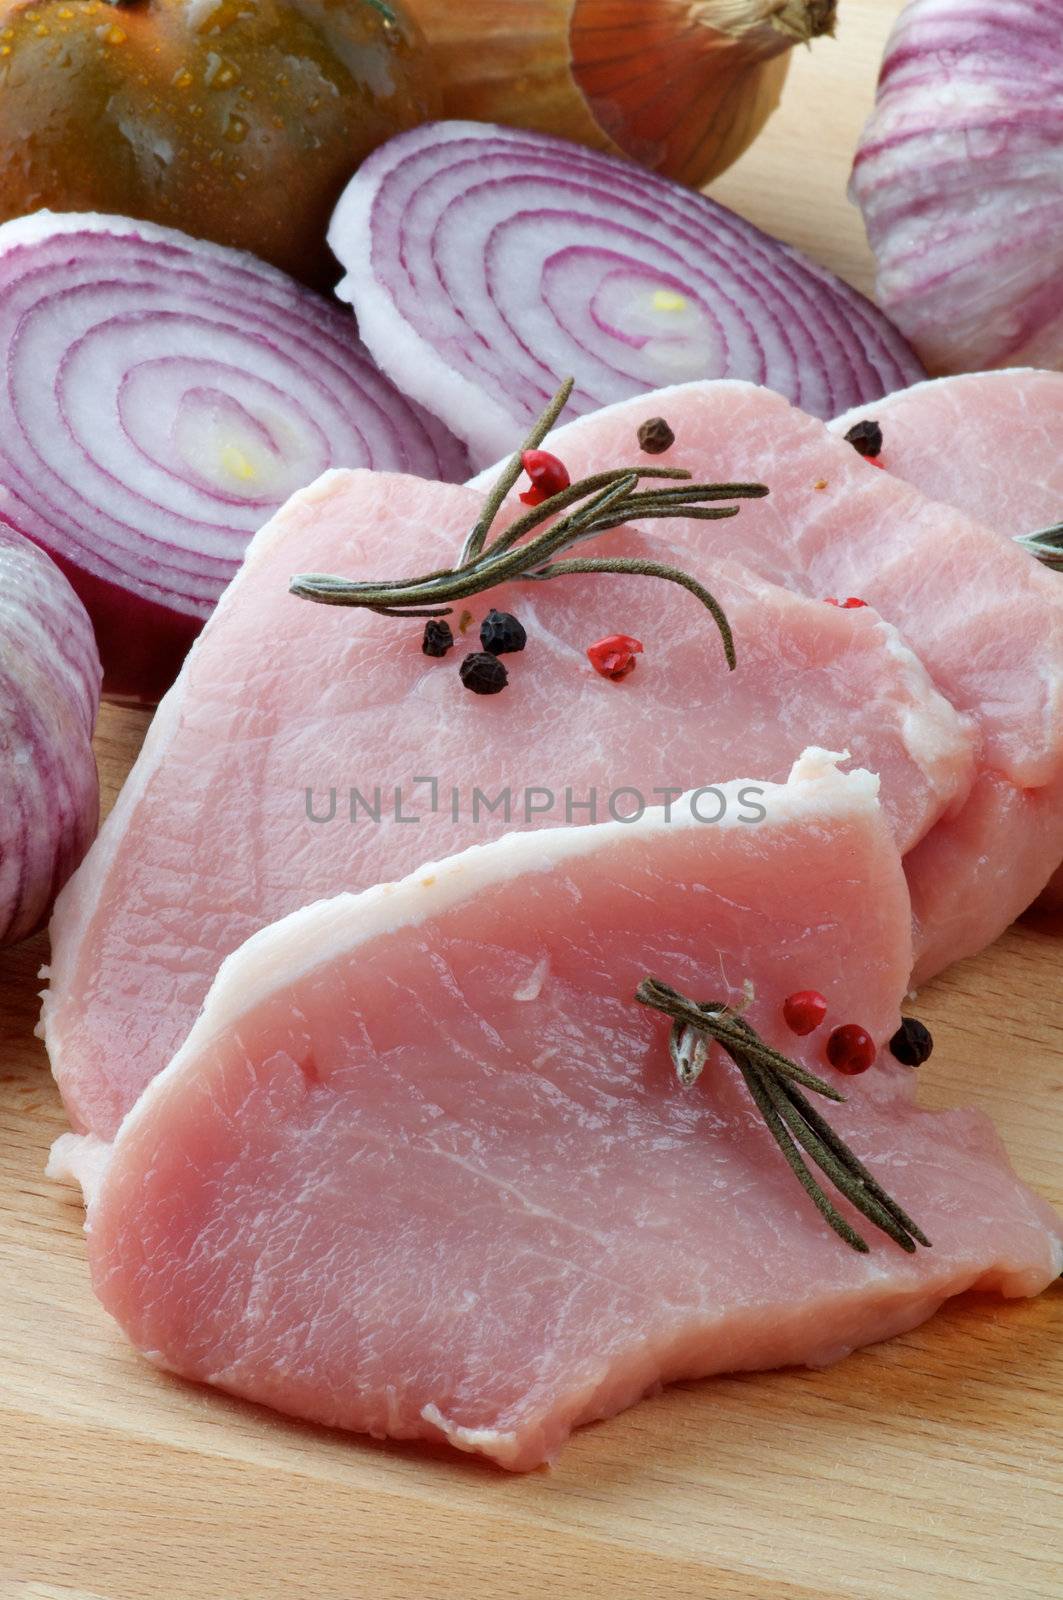 Arrangement of Raw Pork Loin Chops with Rosemary, Peppercorn and Onions on Wood Cutting Board closeup